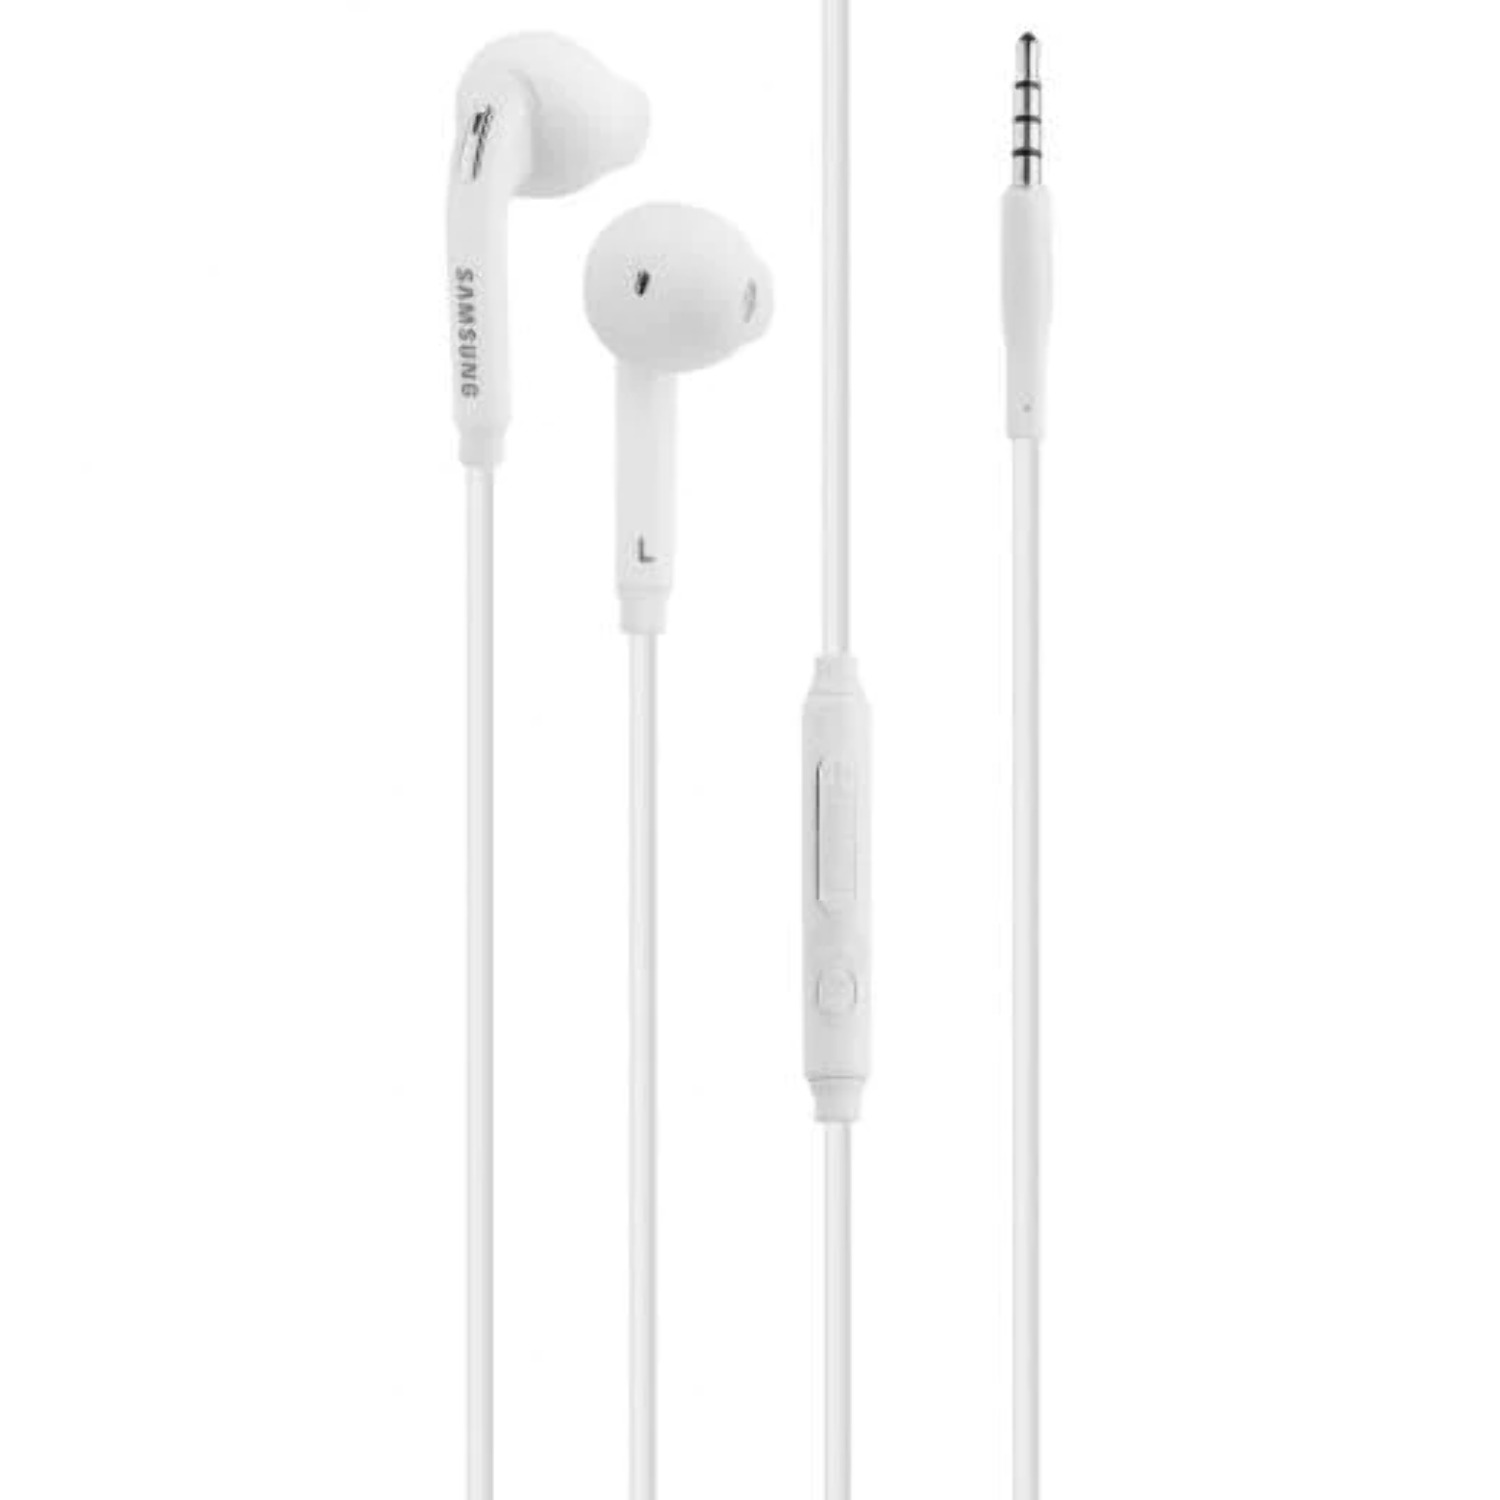 Premium Wired Headset 3.5mm Earbud Stereo In-Ear Headphones with in-line Remote & Microphone Compatible with Xiaomi Xiaomi Mi A1 - image 1 of 1